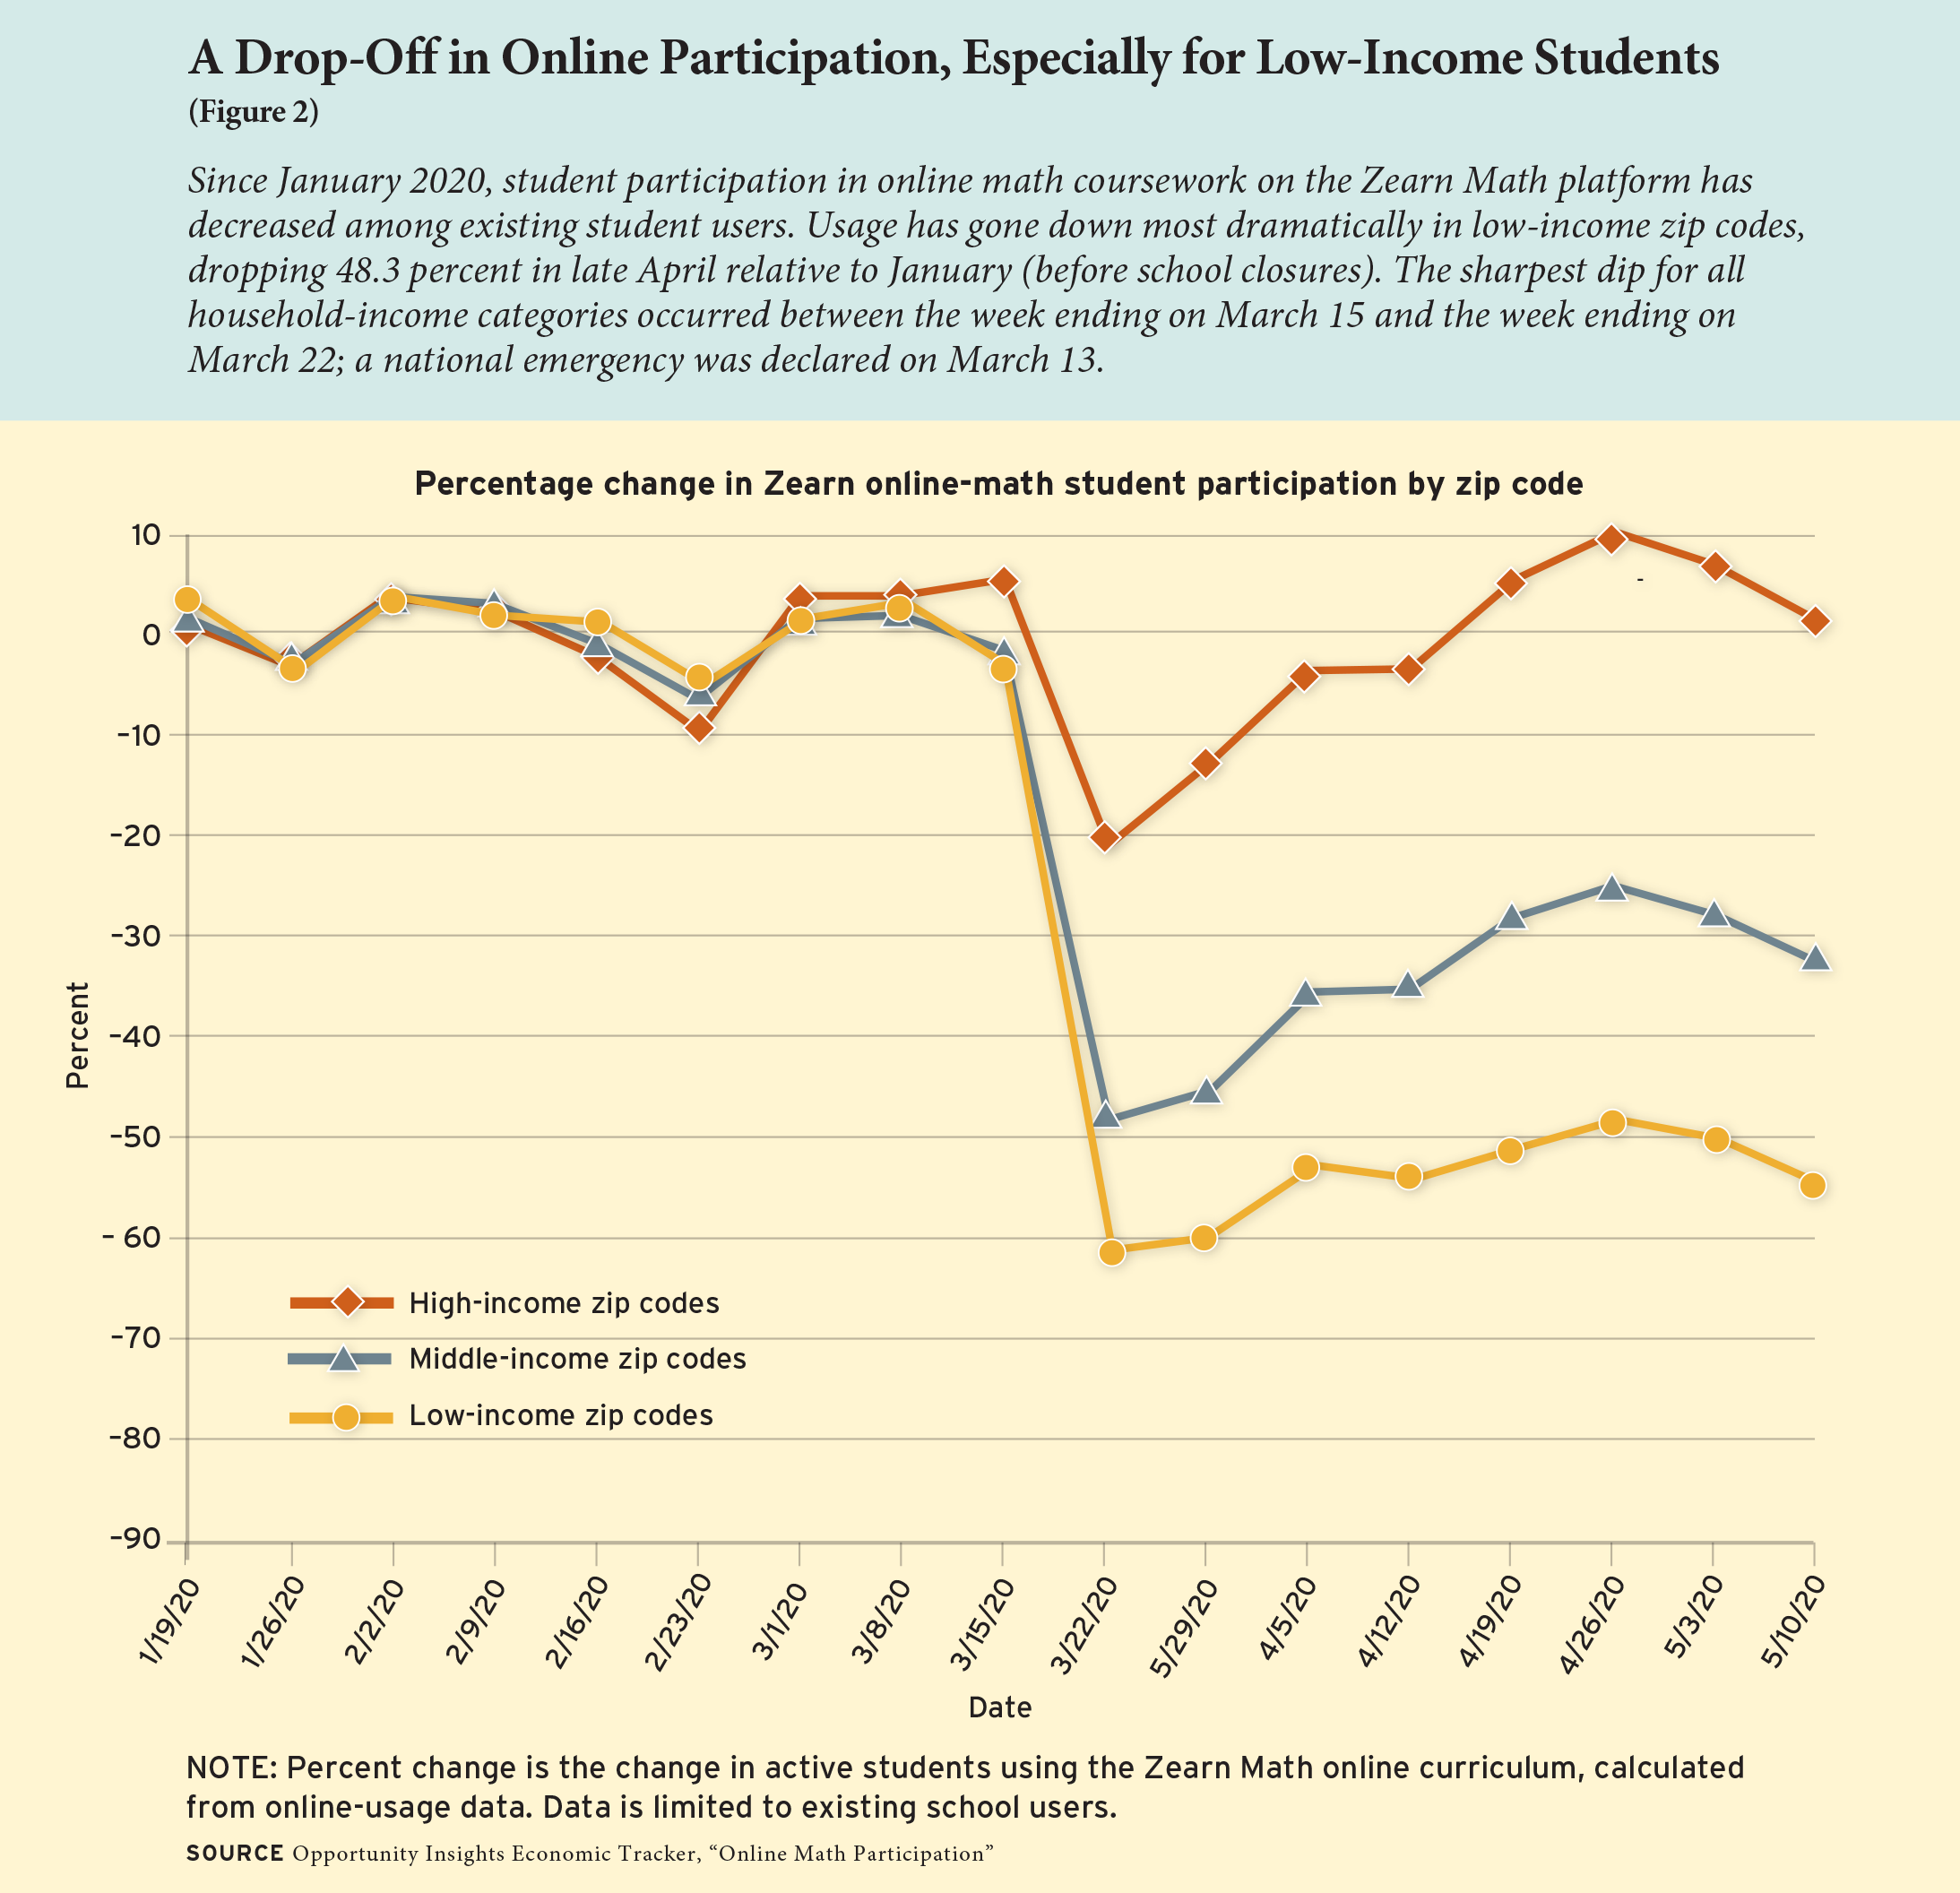 Figure 2: A Drop-Off in Online Participation, Especially for Low-Income Students